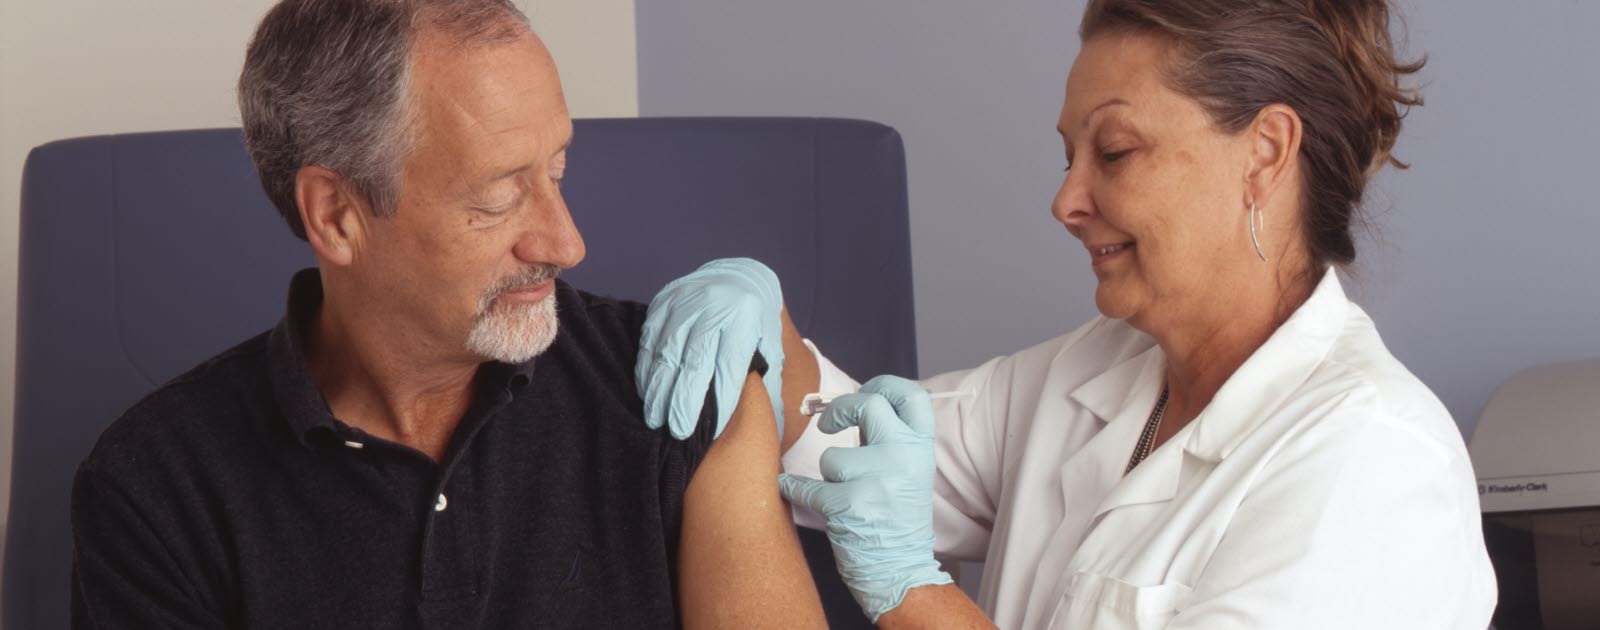 A female nurse administers vaccination into a male patient's arm as he watches.